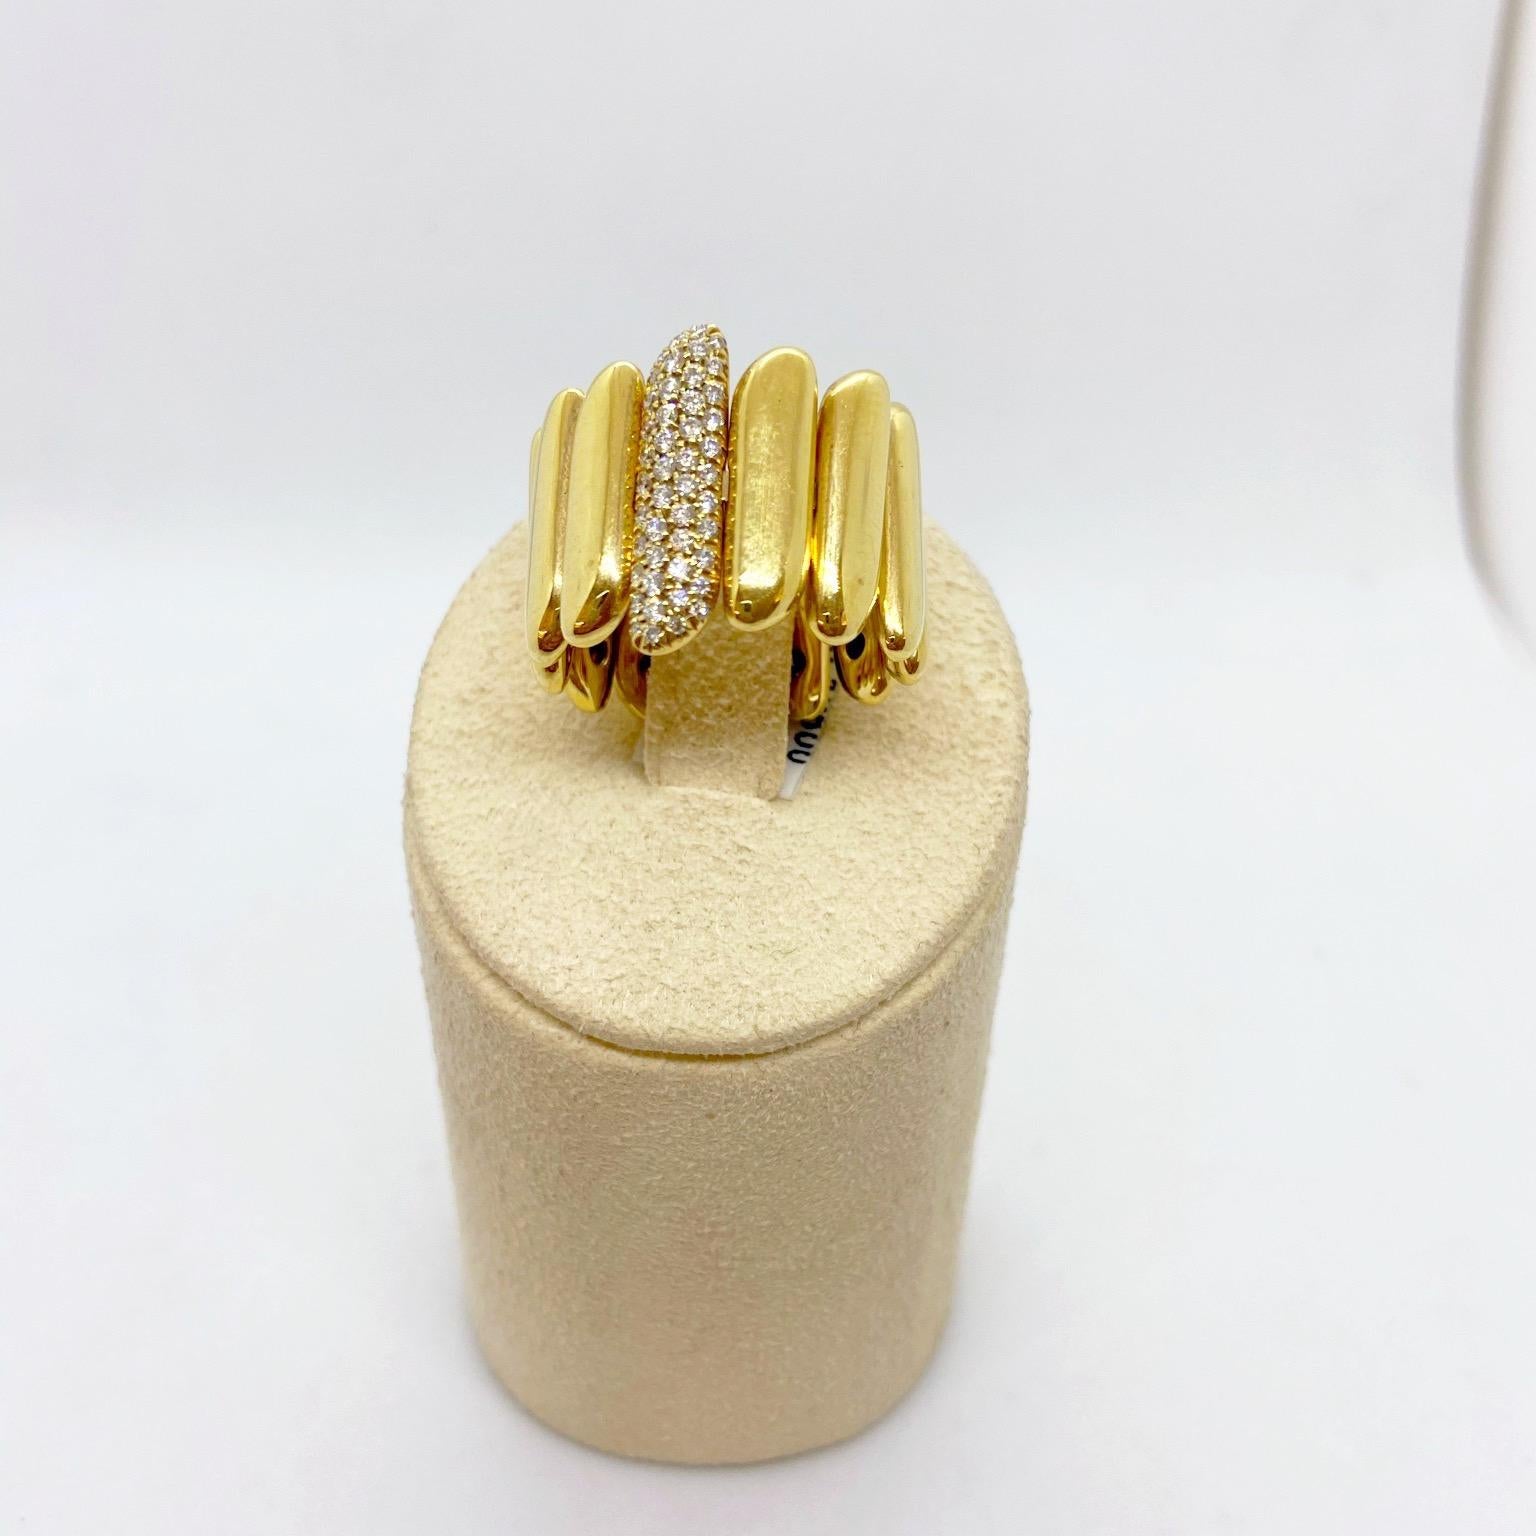 This 18 karat gold ring is designed with shiny yellow gold motifs that are approximately 16.2mm wide. The center motif is set with pave white diamonds. The band type ring is opened in the back allowing for expansion. Fits size 6-9. Matching bracelet